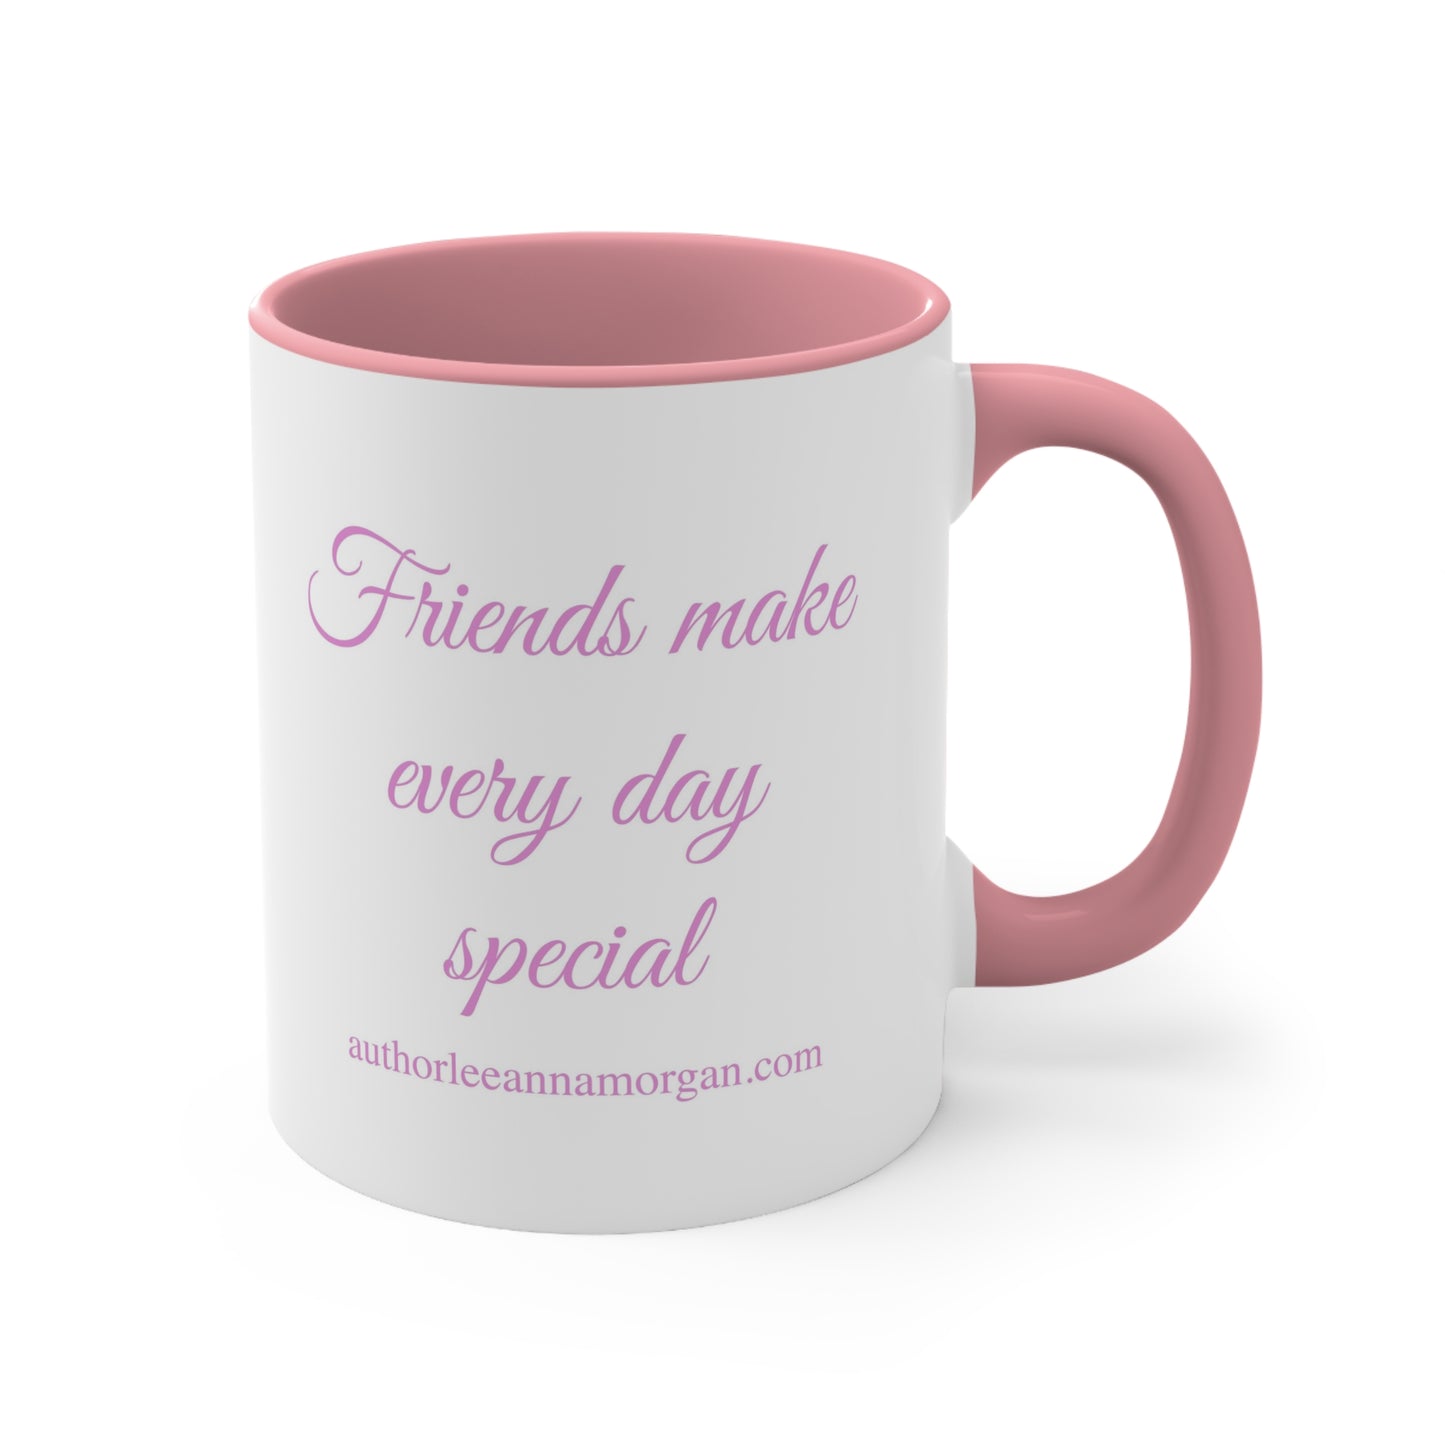 The Wish Coffee Mug - Friends make every day special